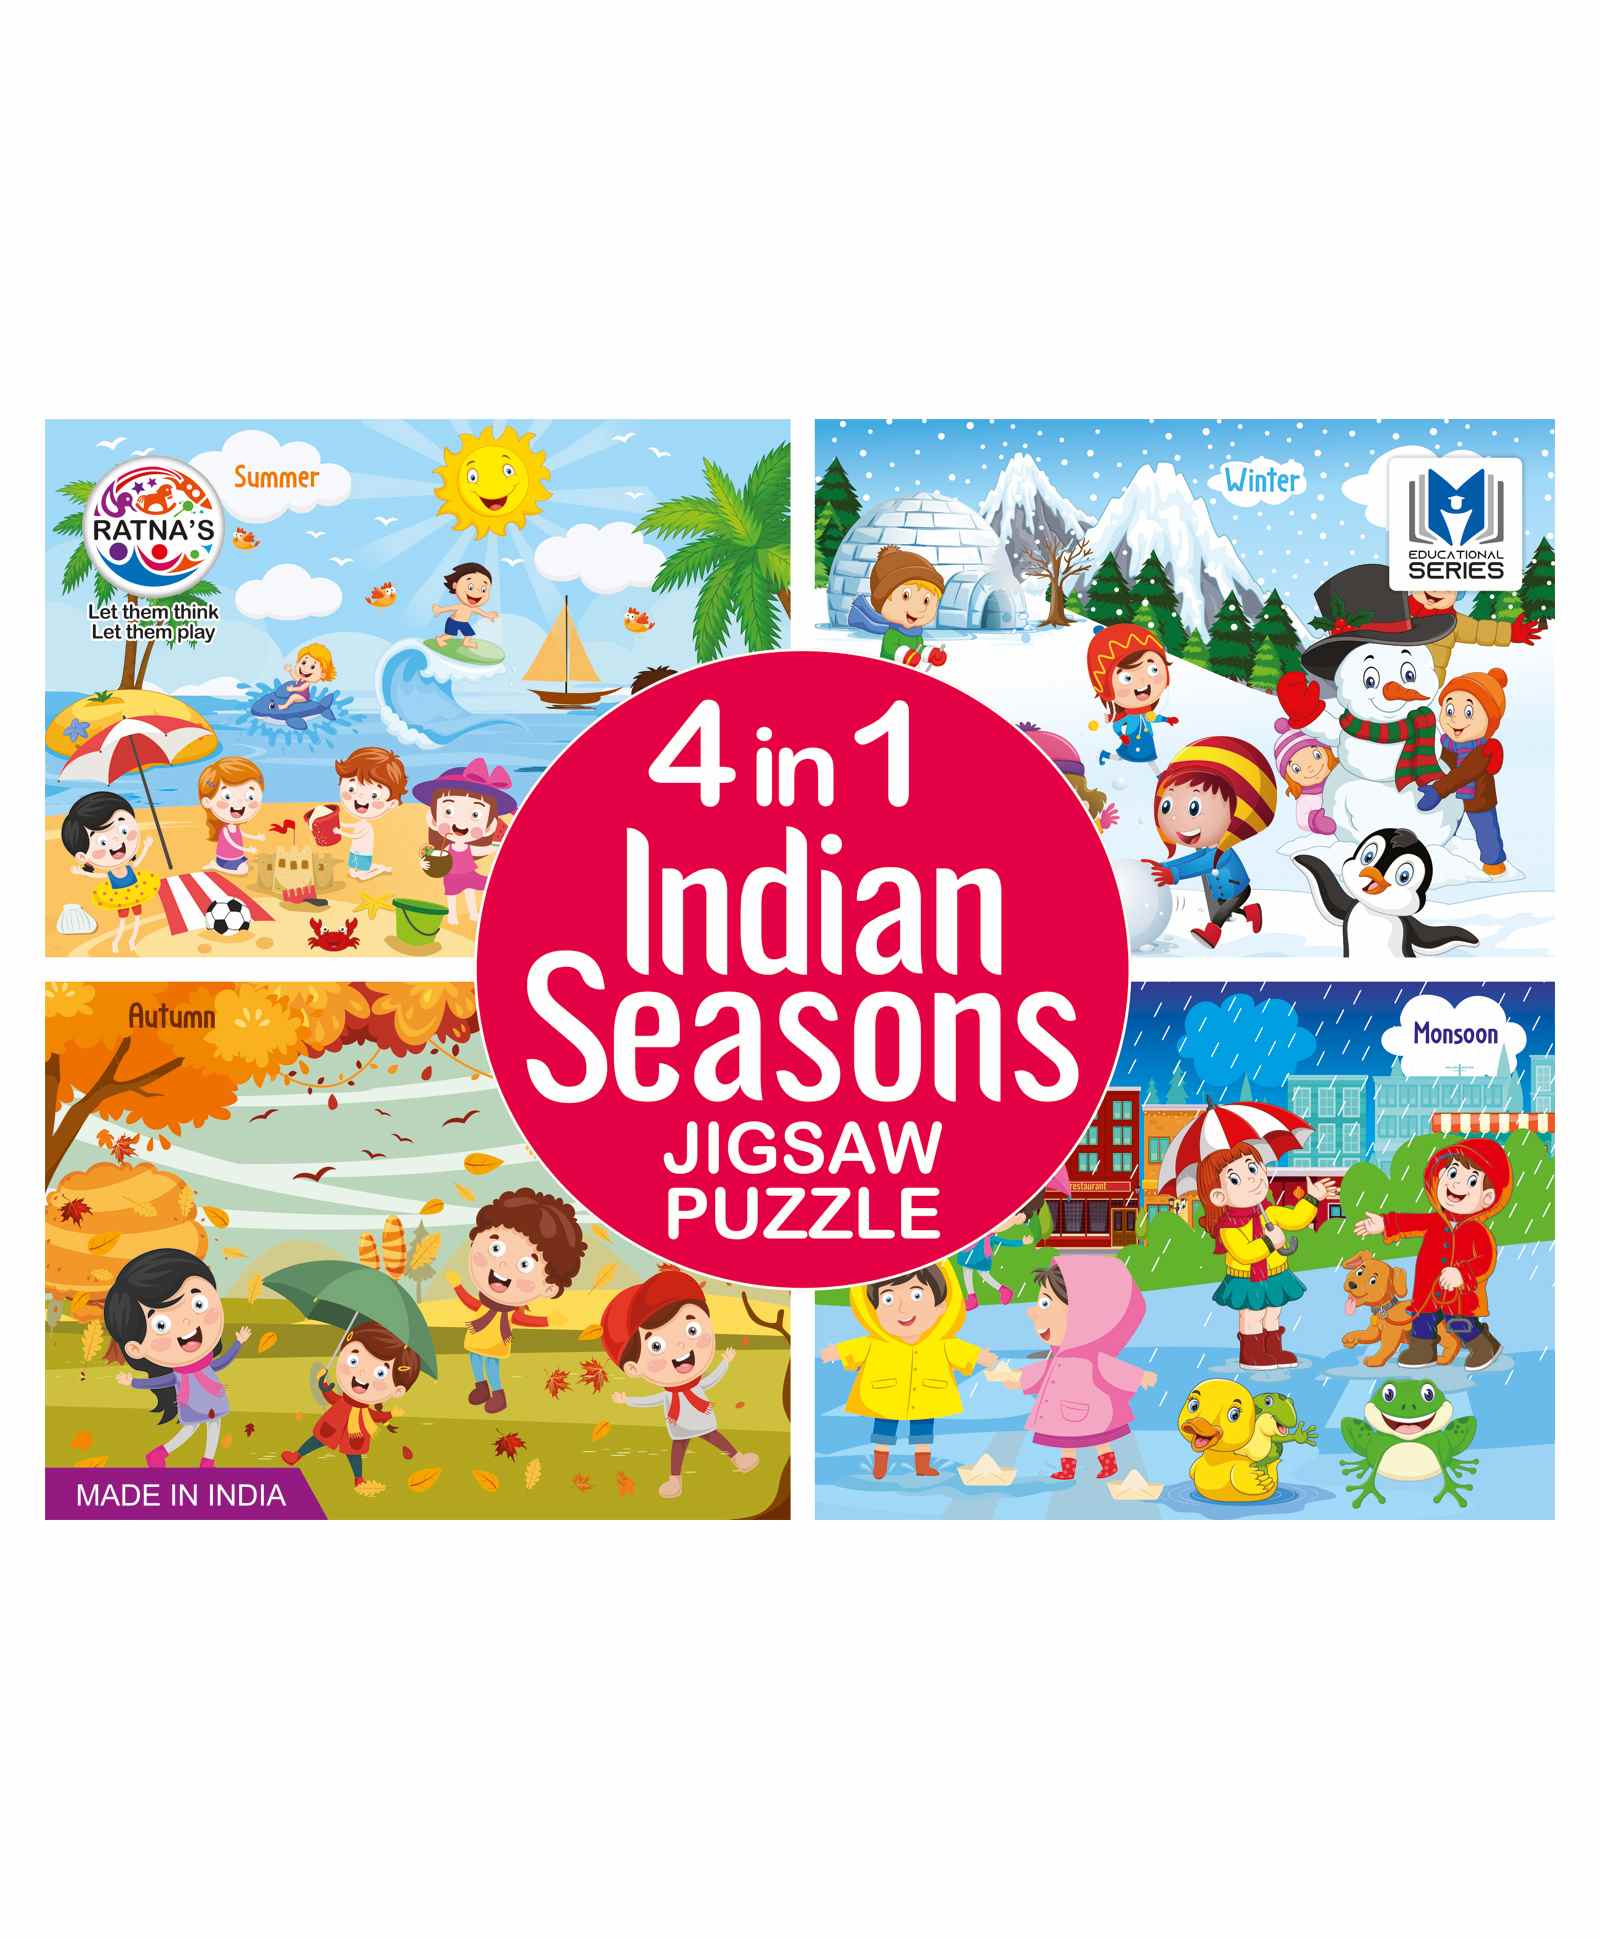 Wooden Classic Toys Jigsaw Kids Development Puzzle Child Educational Games YD